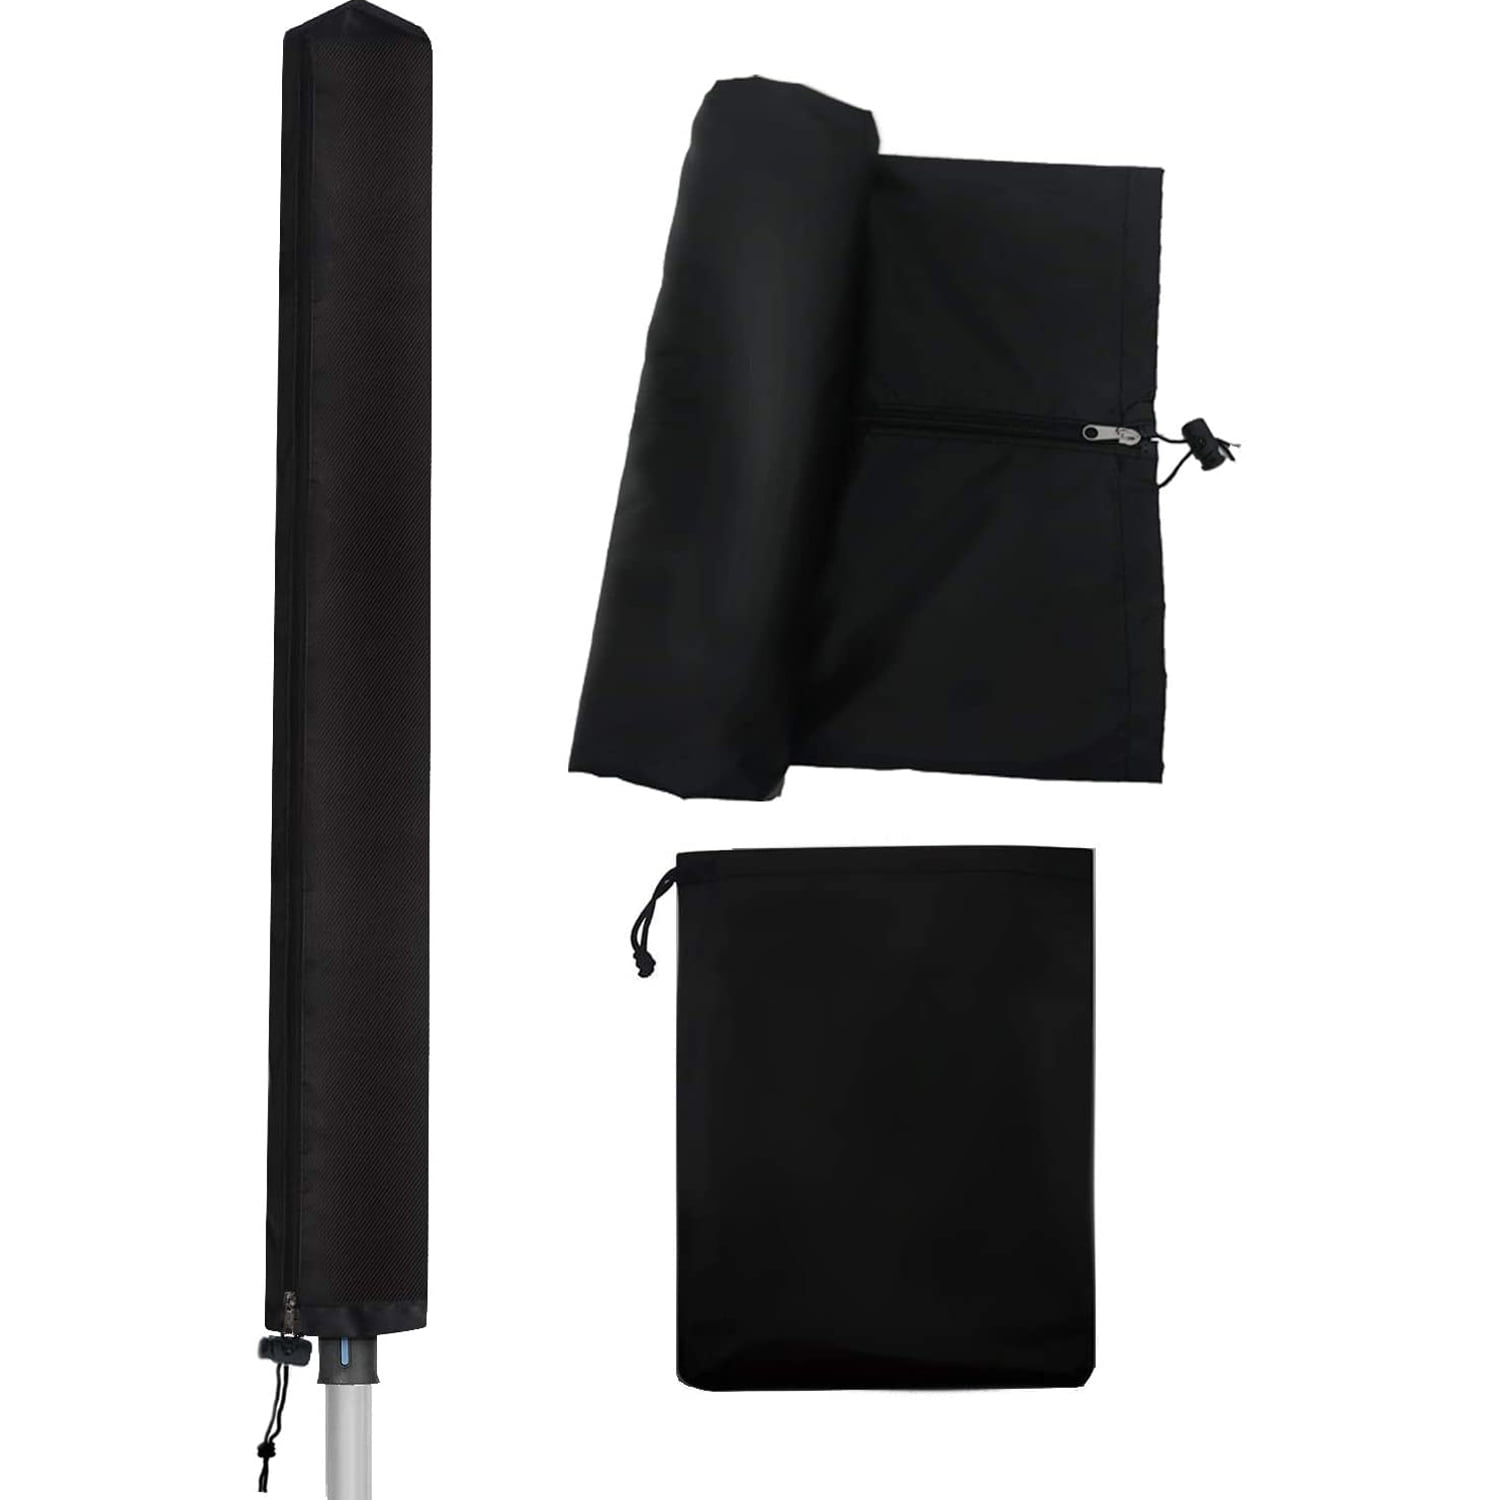 Brabantia Brabantia Rotary Washing Line Cover Strong Robust Dryer Black Protective Cover, 